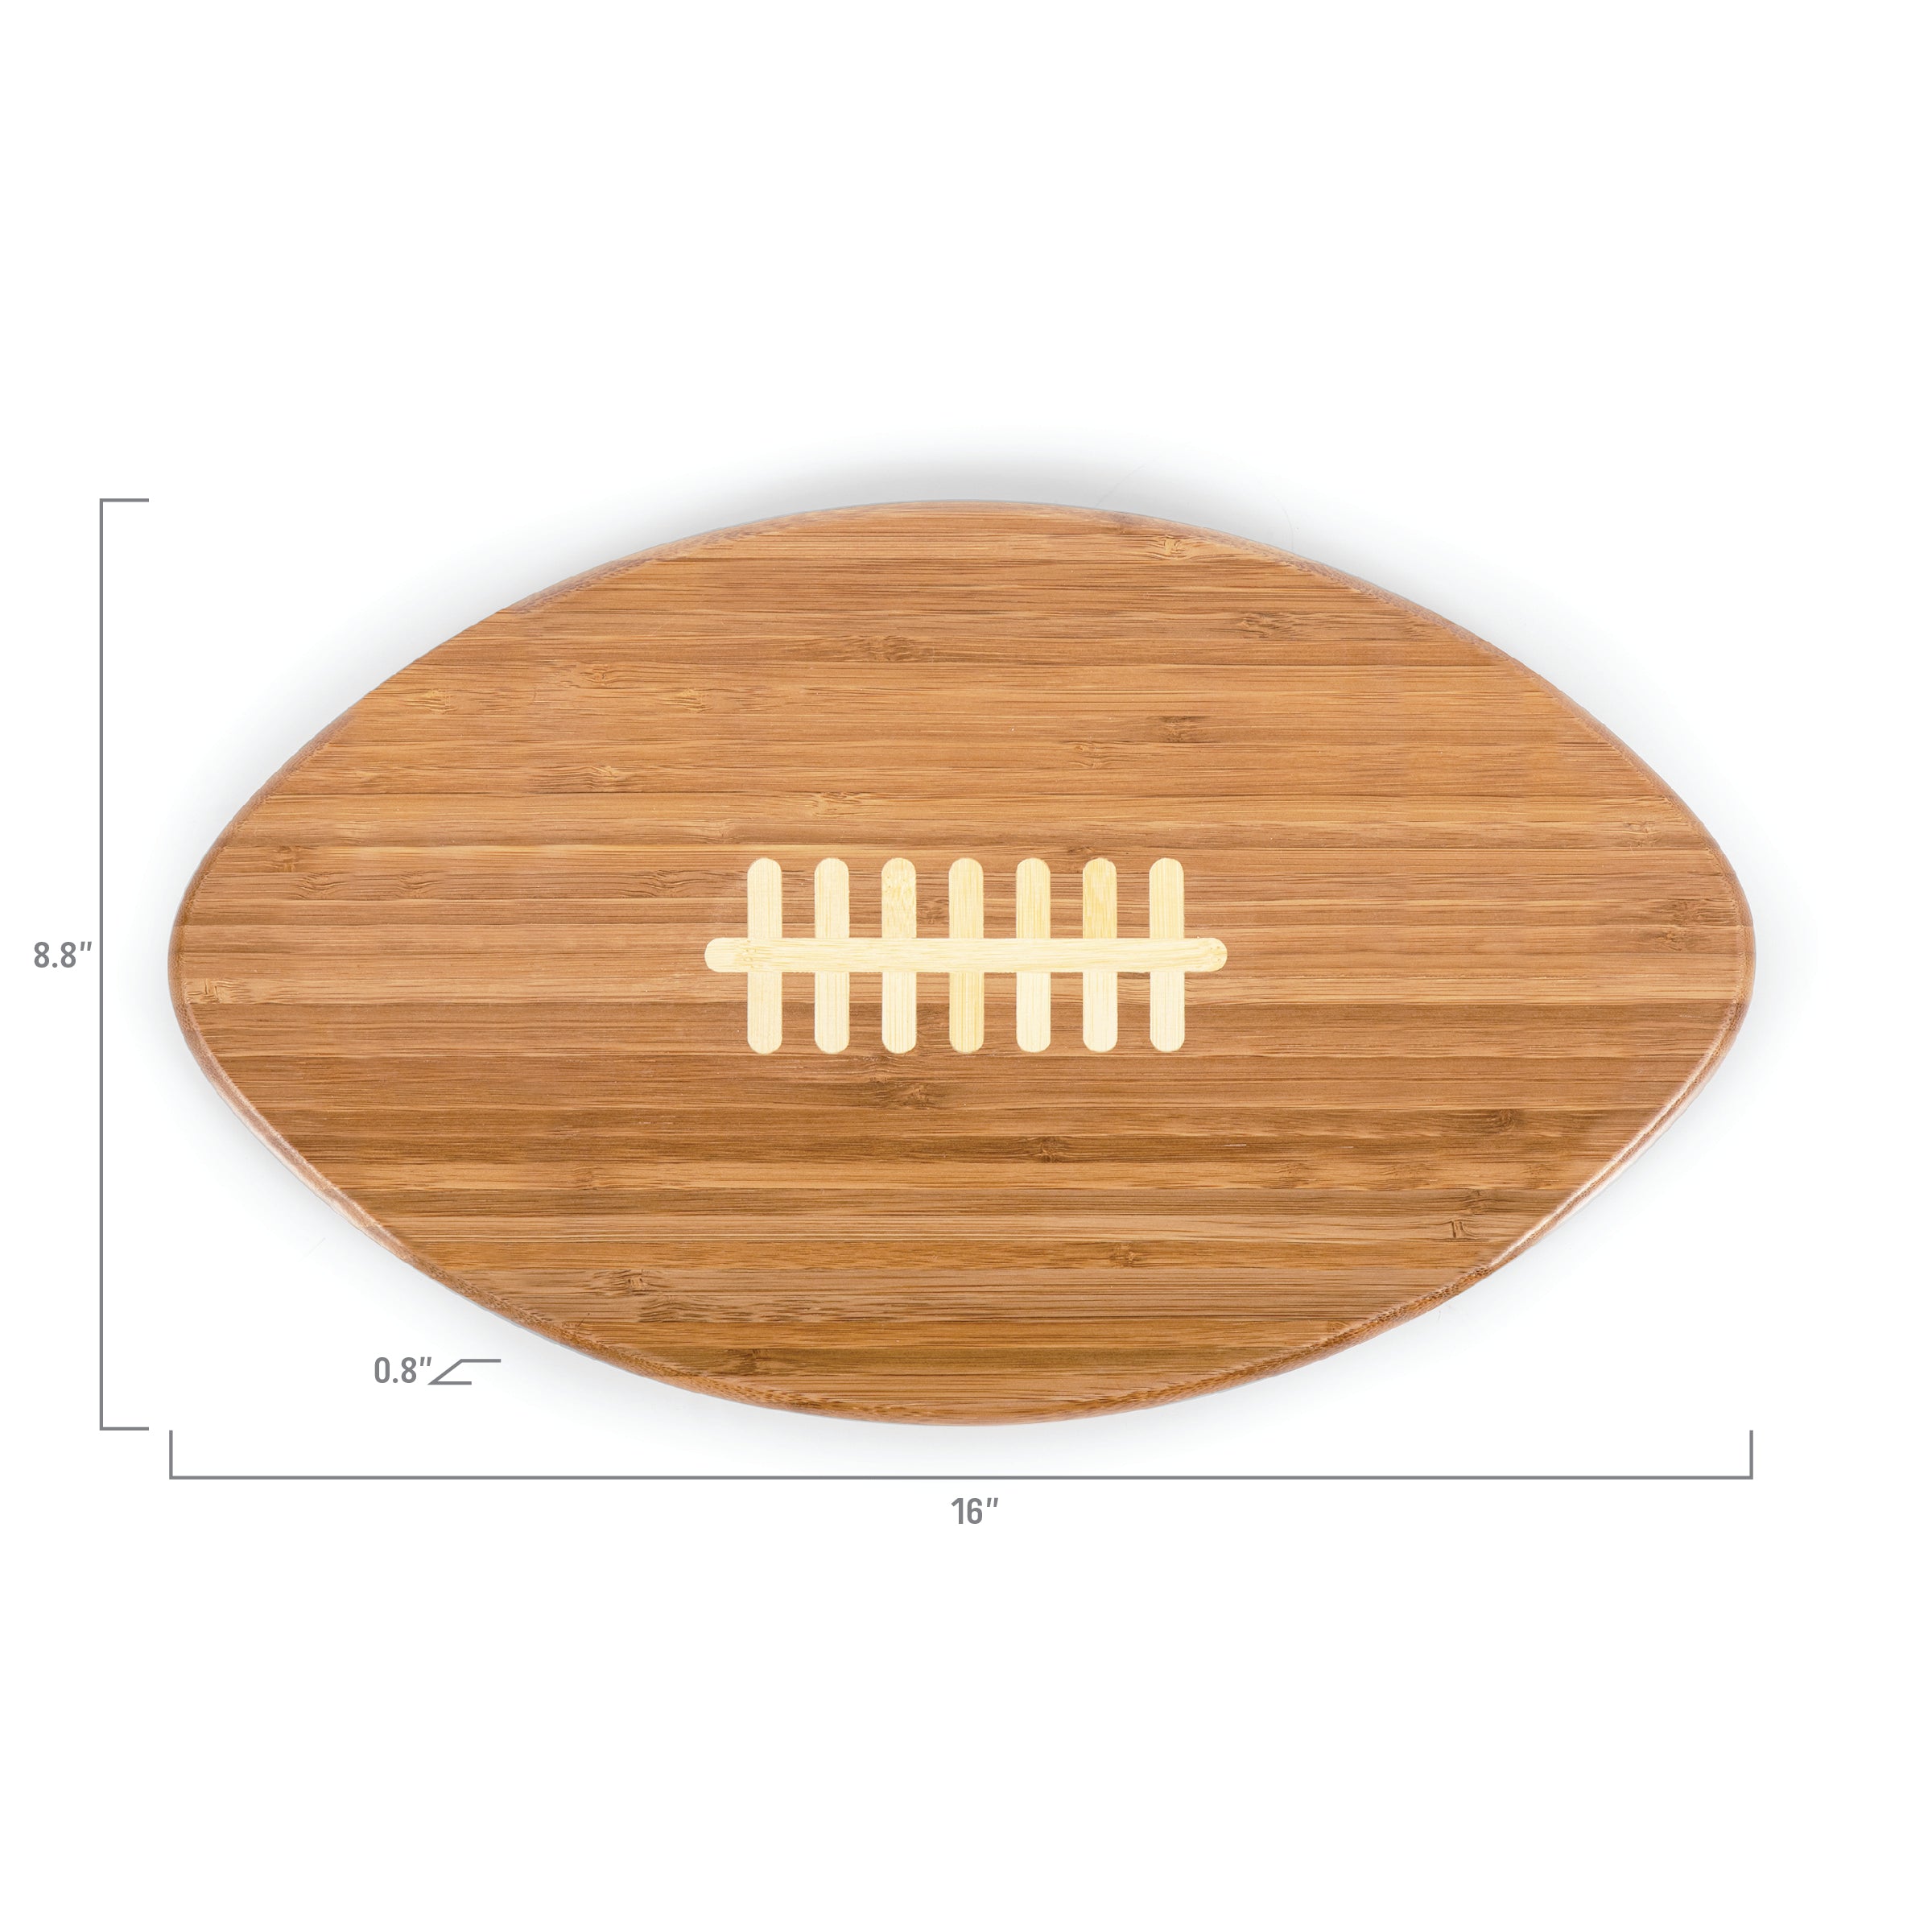 Jacksonville Jaguars Mickey Mouse - Touchdown! Football Cutting Board & Serving Tray